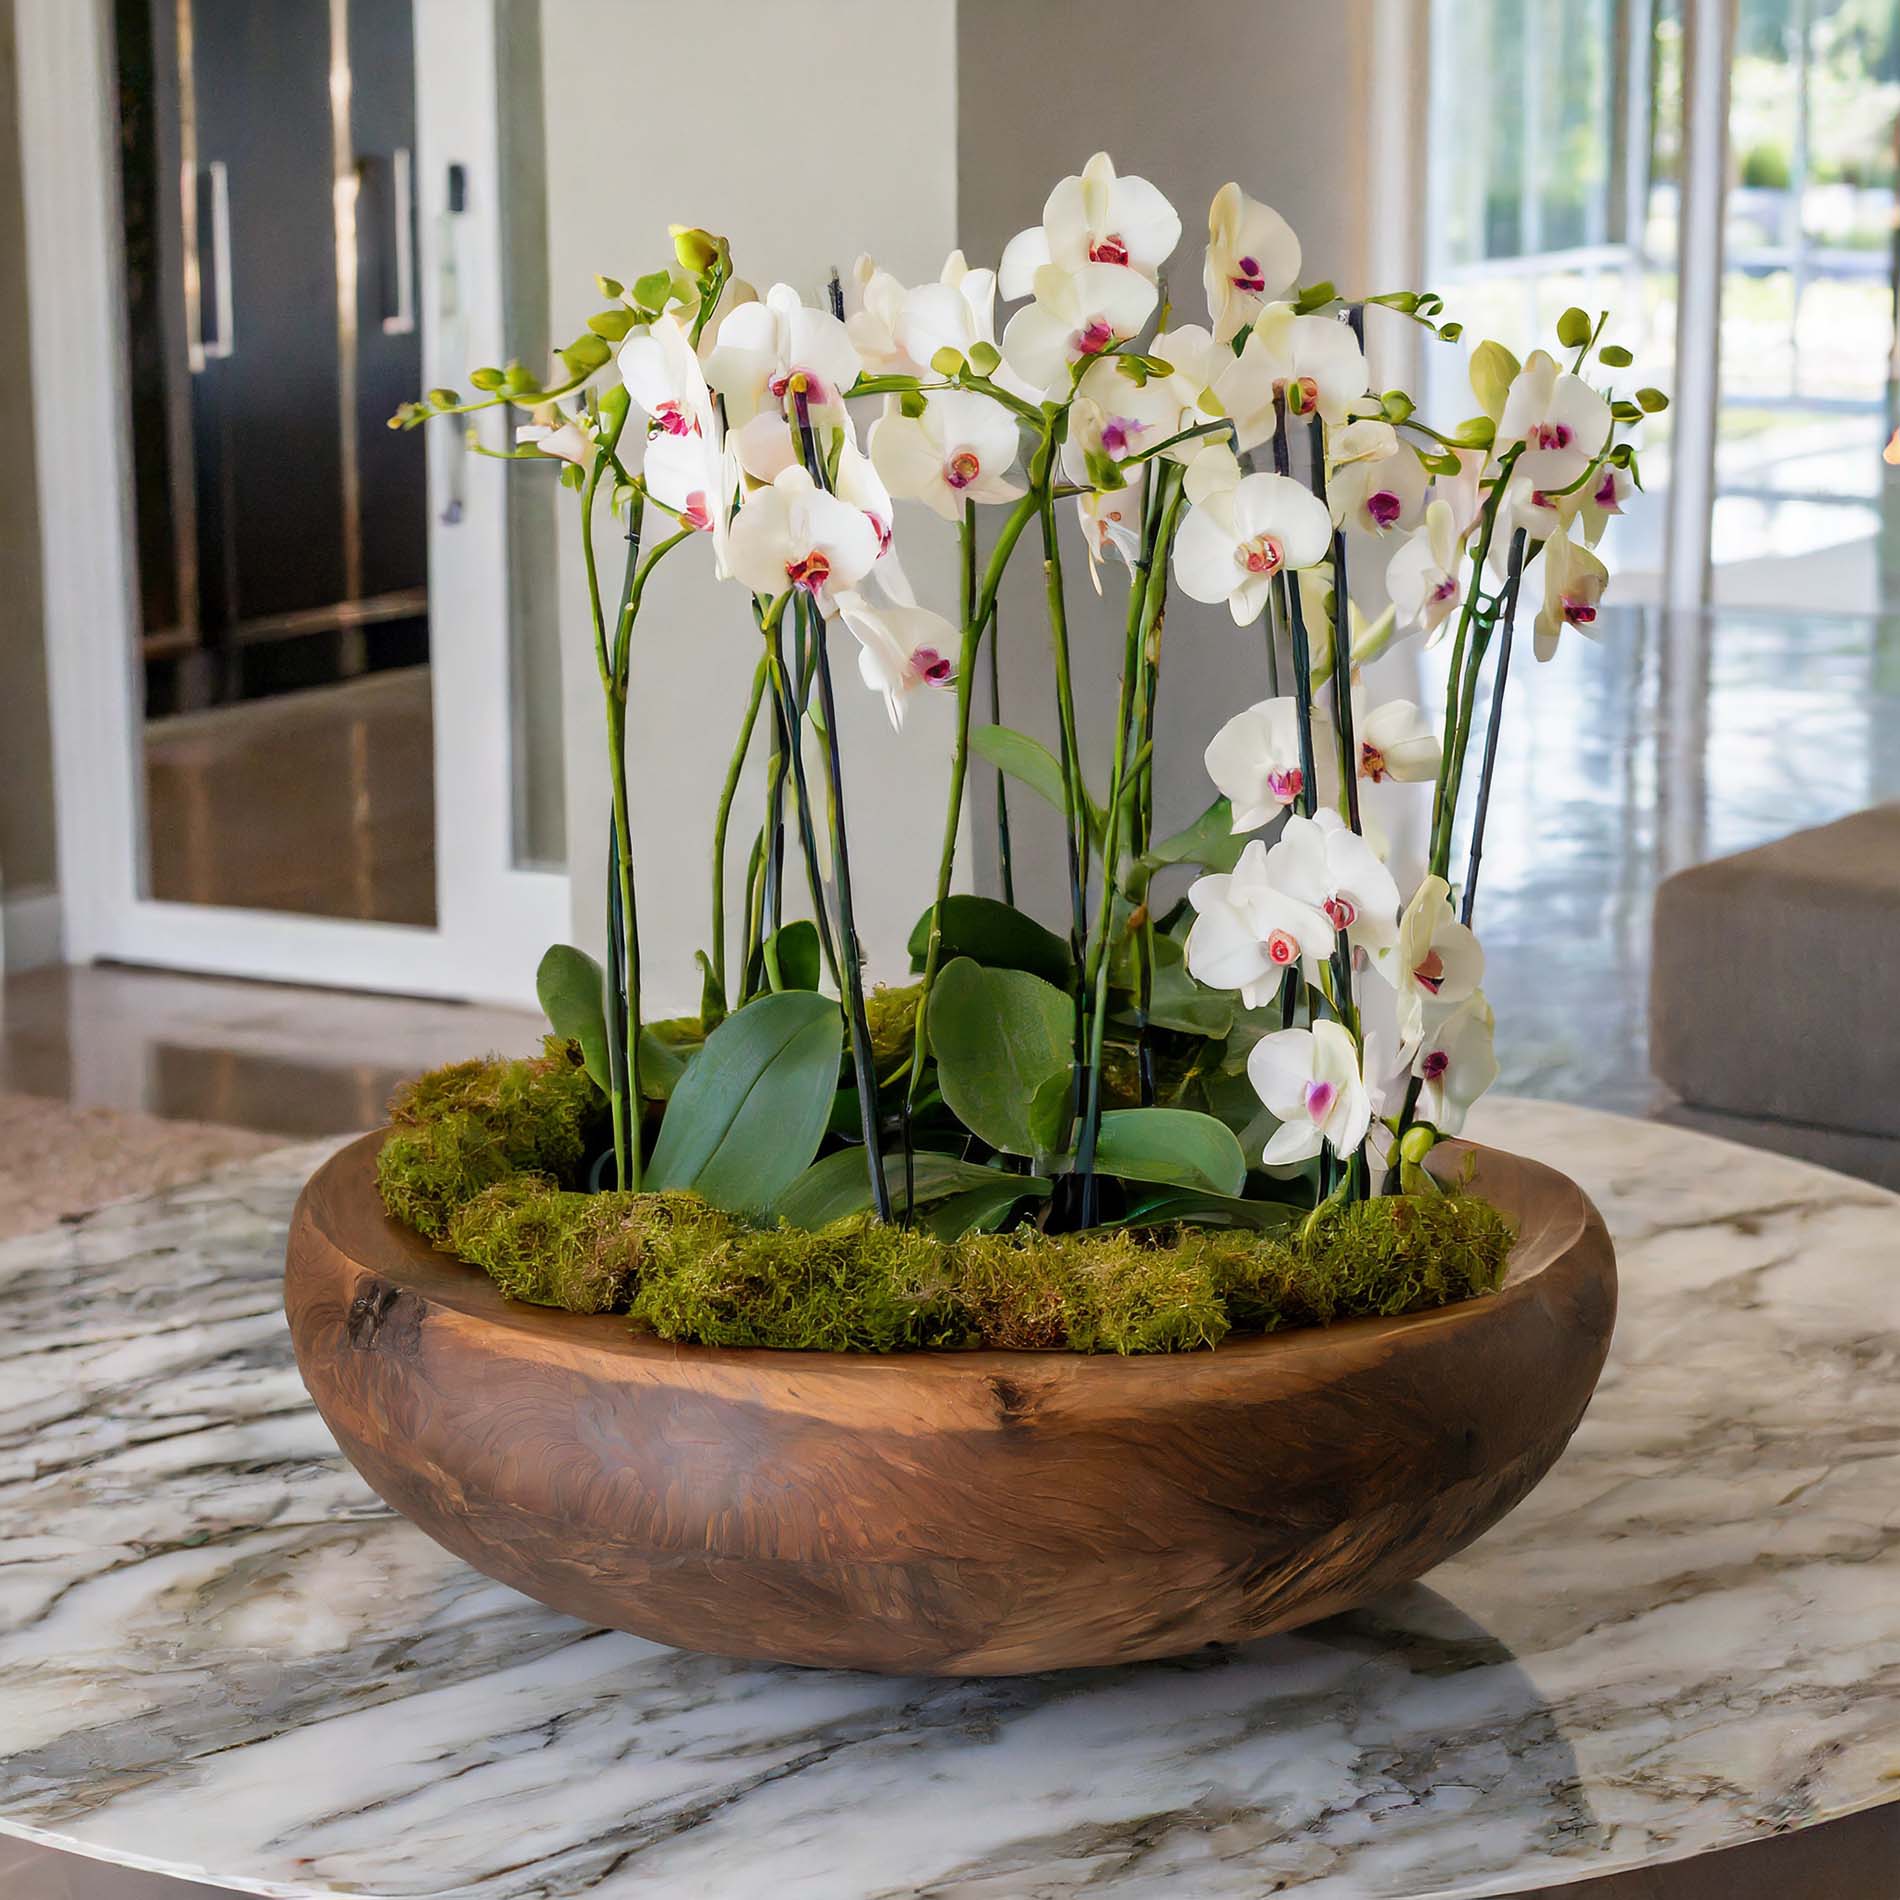 Round wooden dough bowl filled with white orchids and moss on marble table.